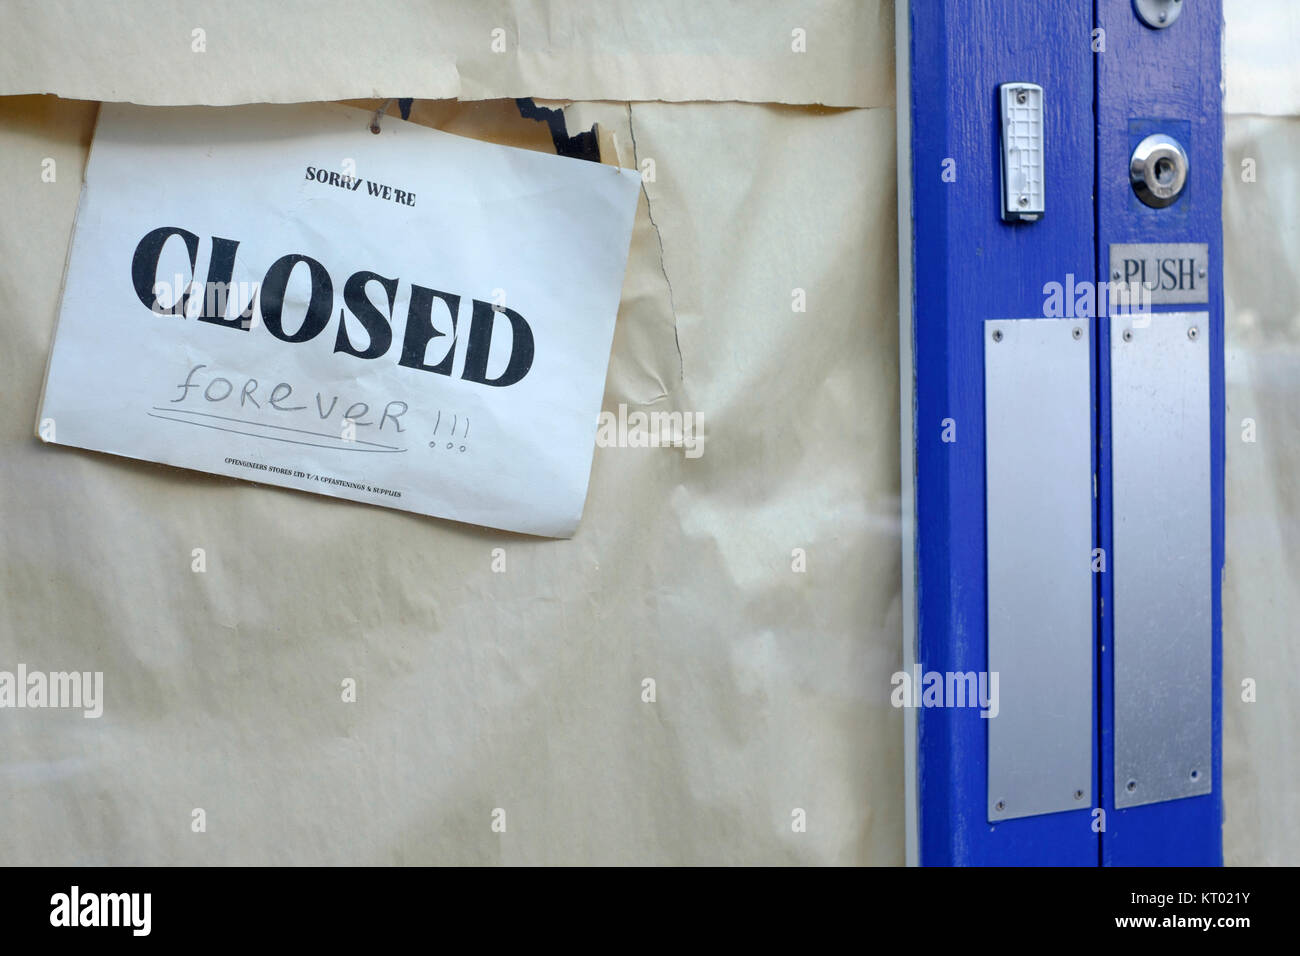 a closed sign with the word forever hand written underneath hangs in the window of an out of business shop england uk Stock Photo